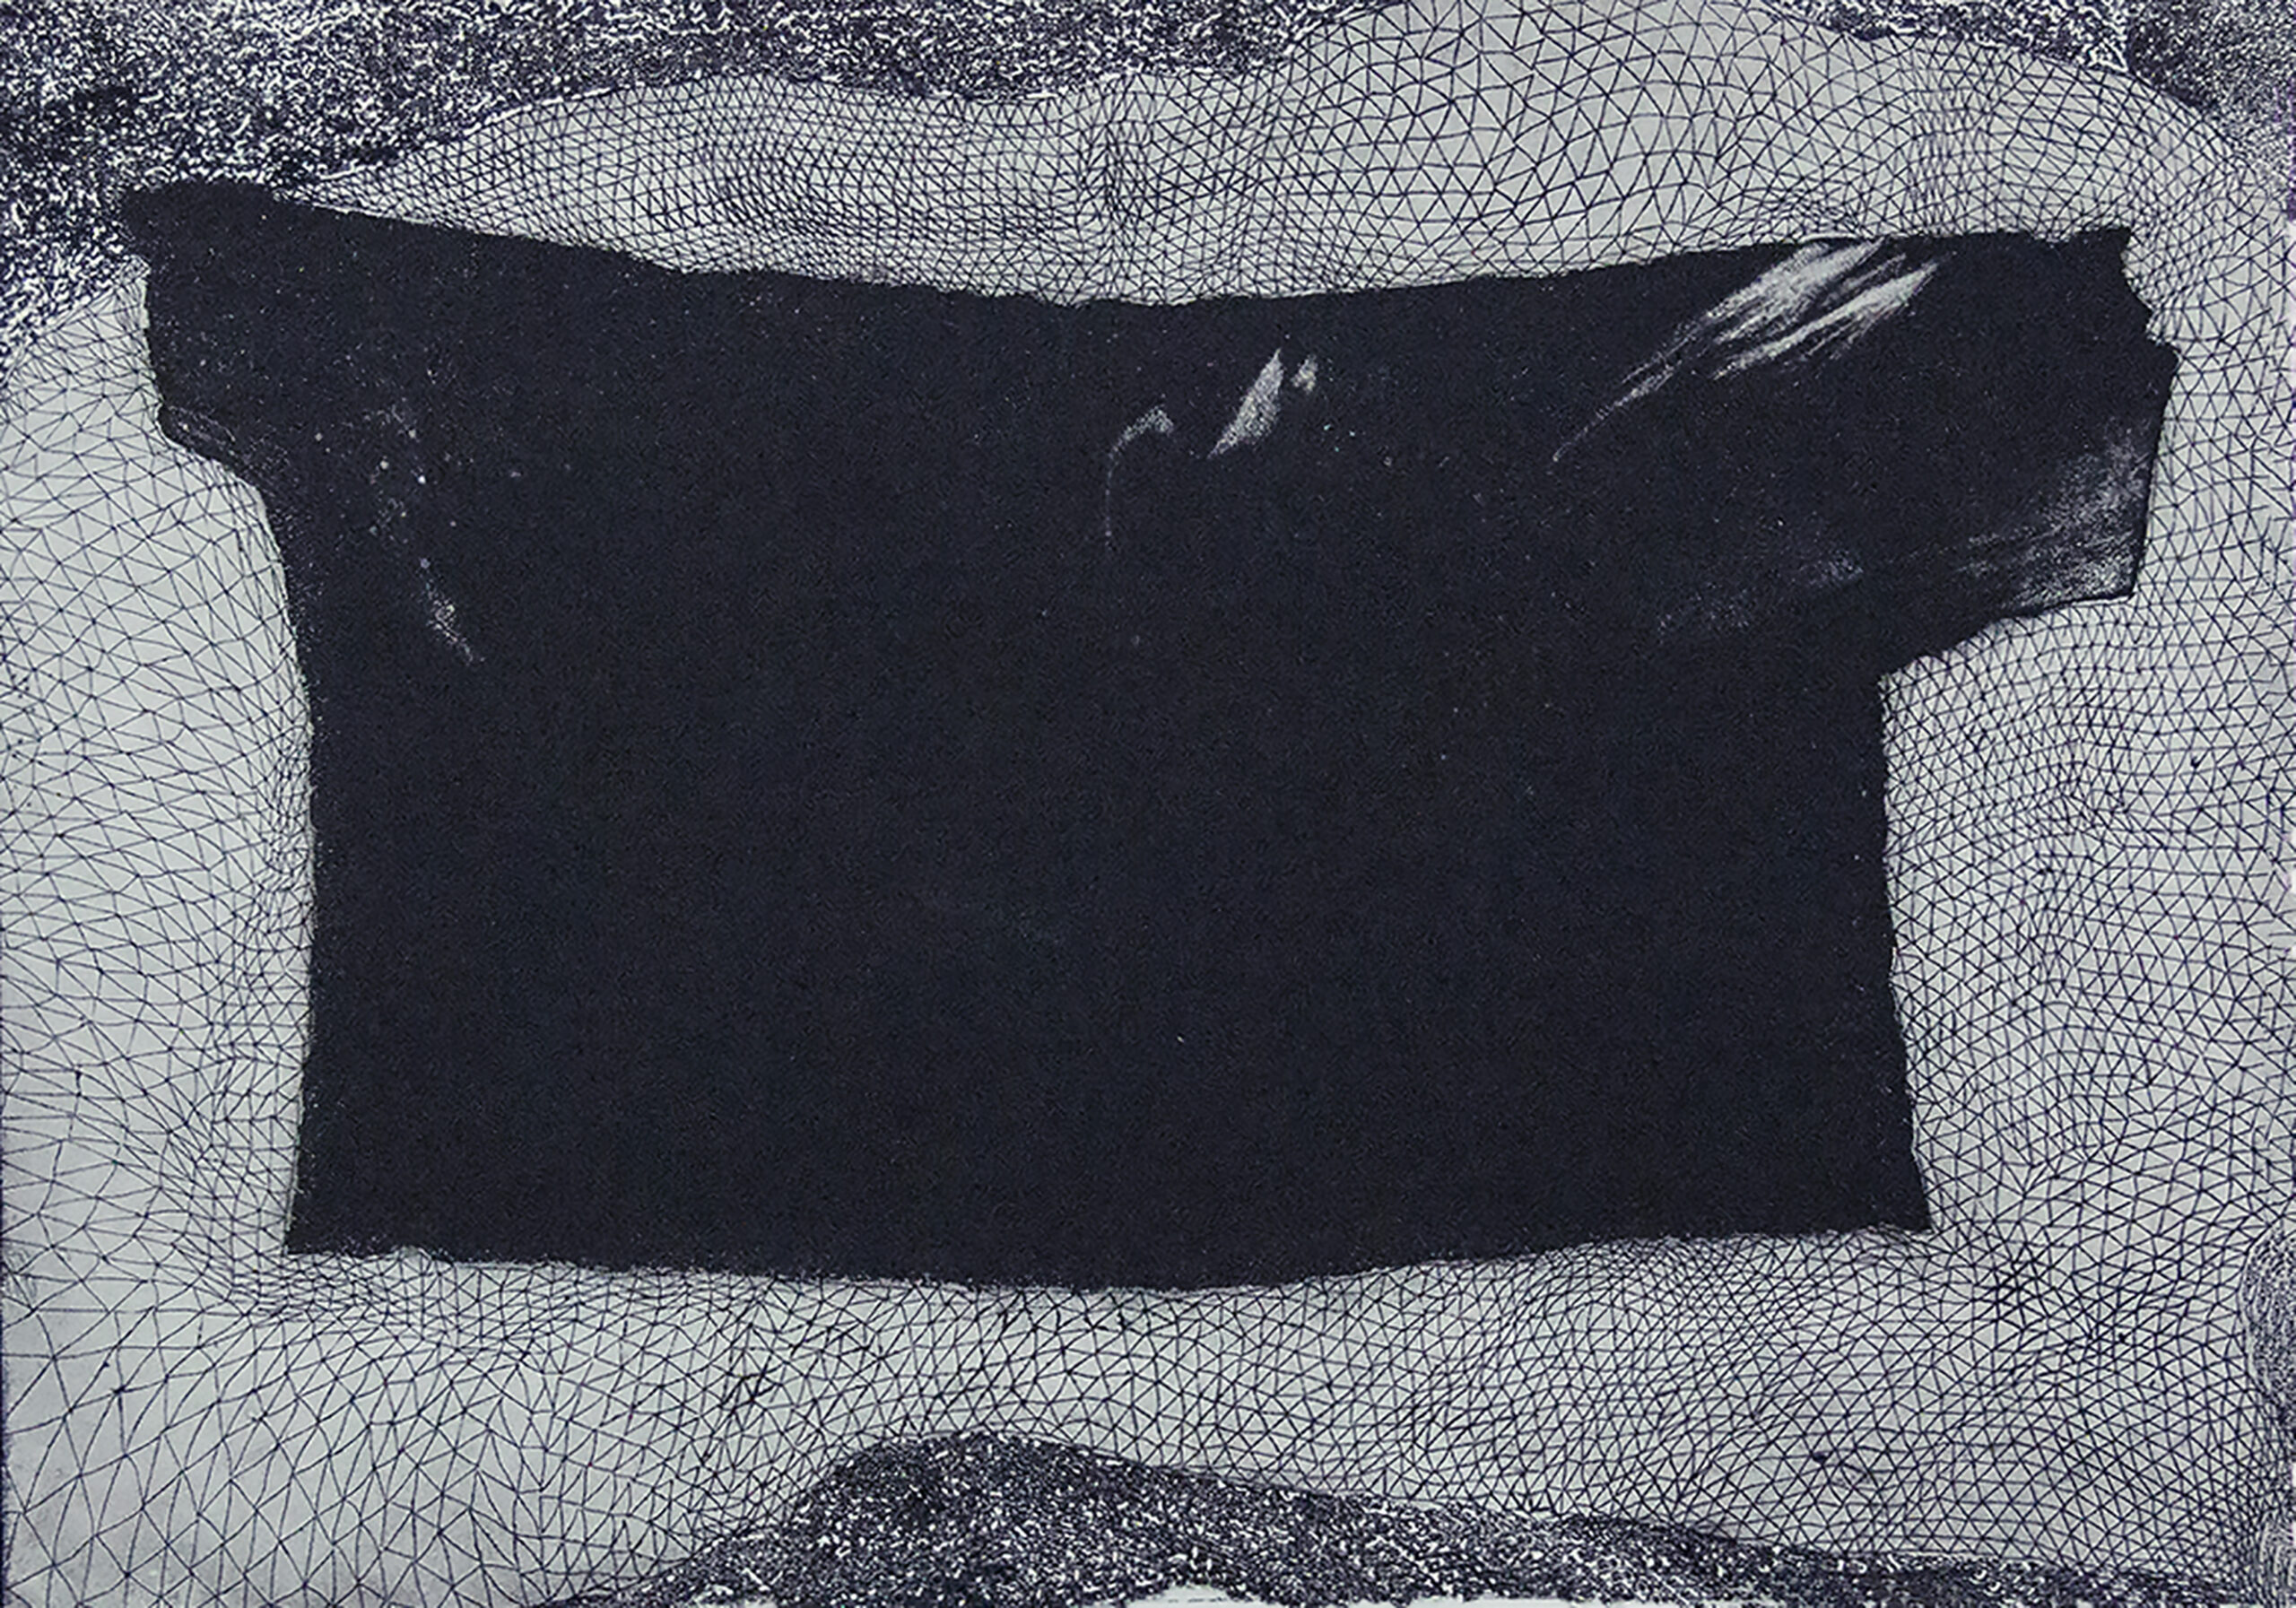 project 3'4-Dark energy II-48.4 × 68.6cm 材料：copperplate，Fabriano paper ；技法：ecthing，aquatint 2015